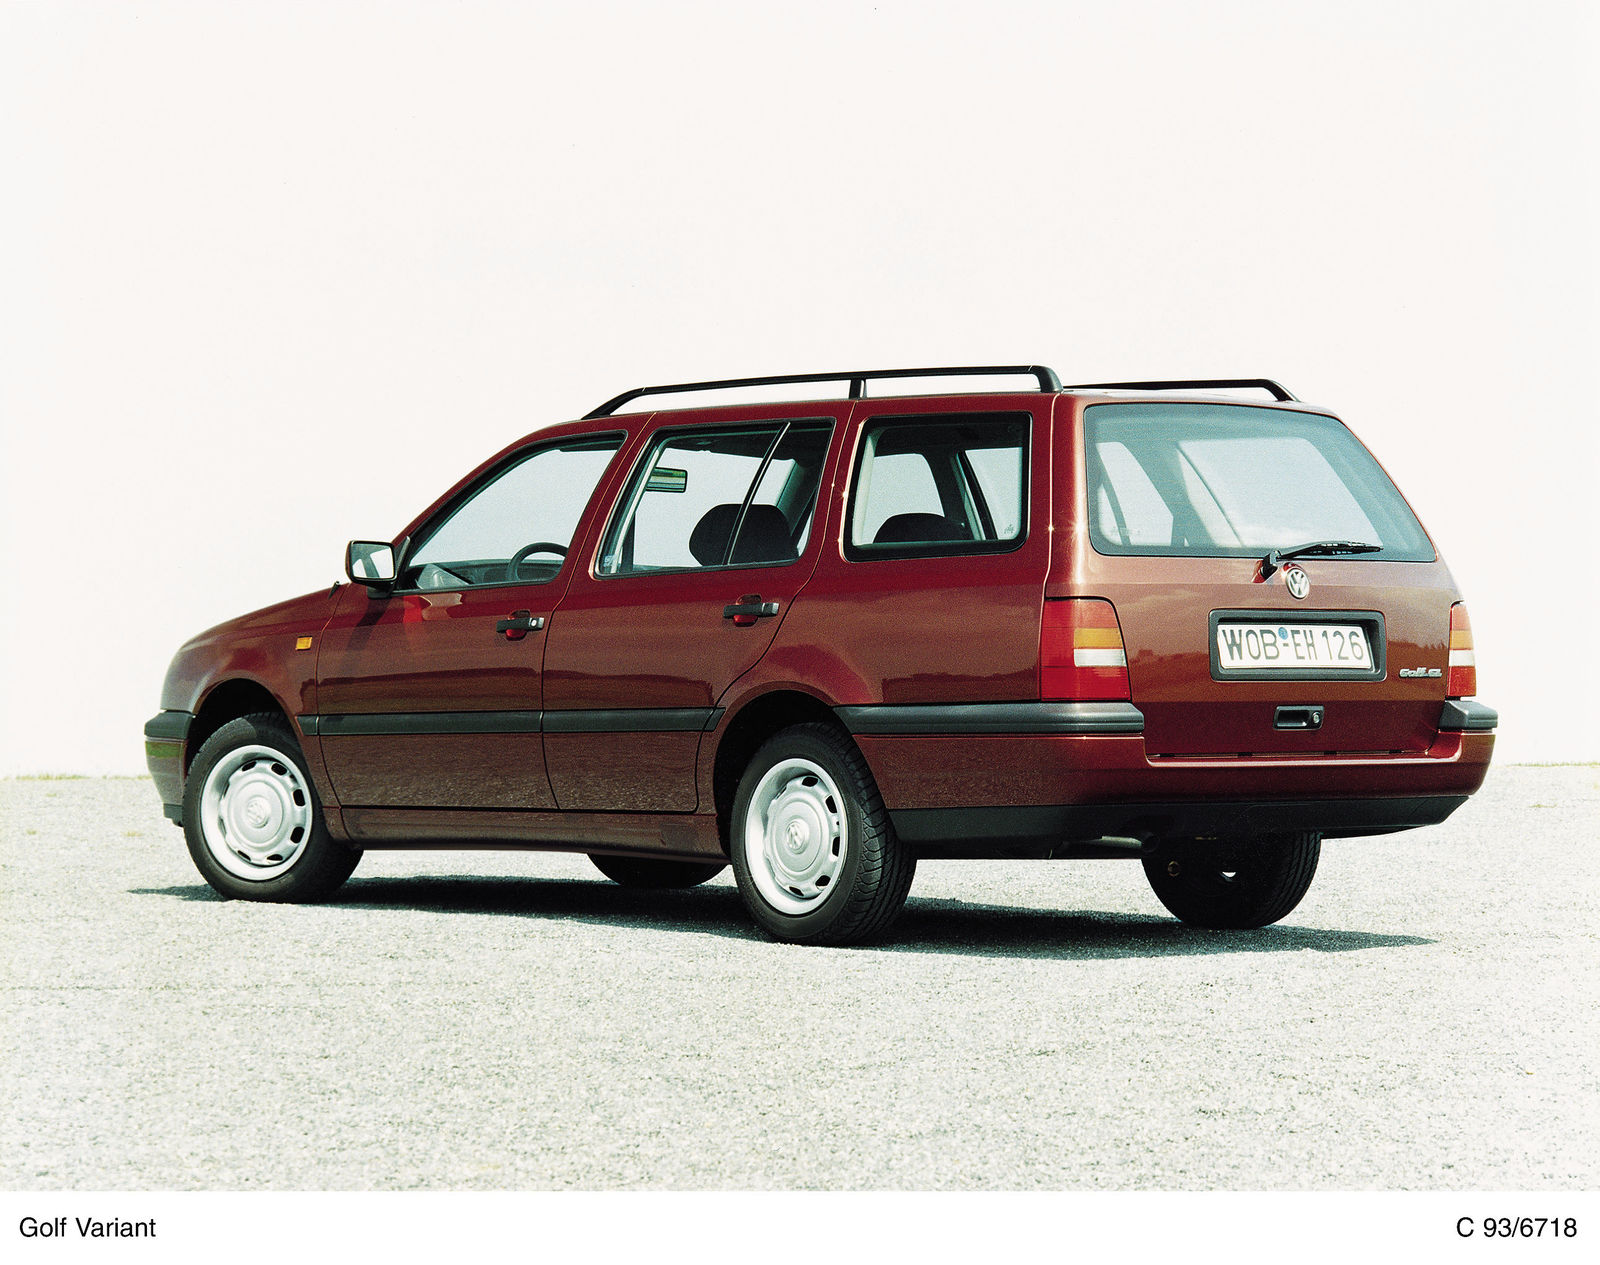 Product: Golf Variant (1993)